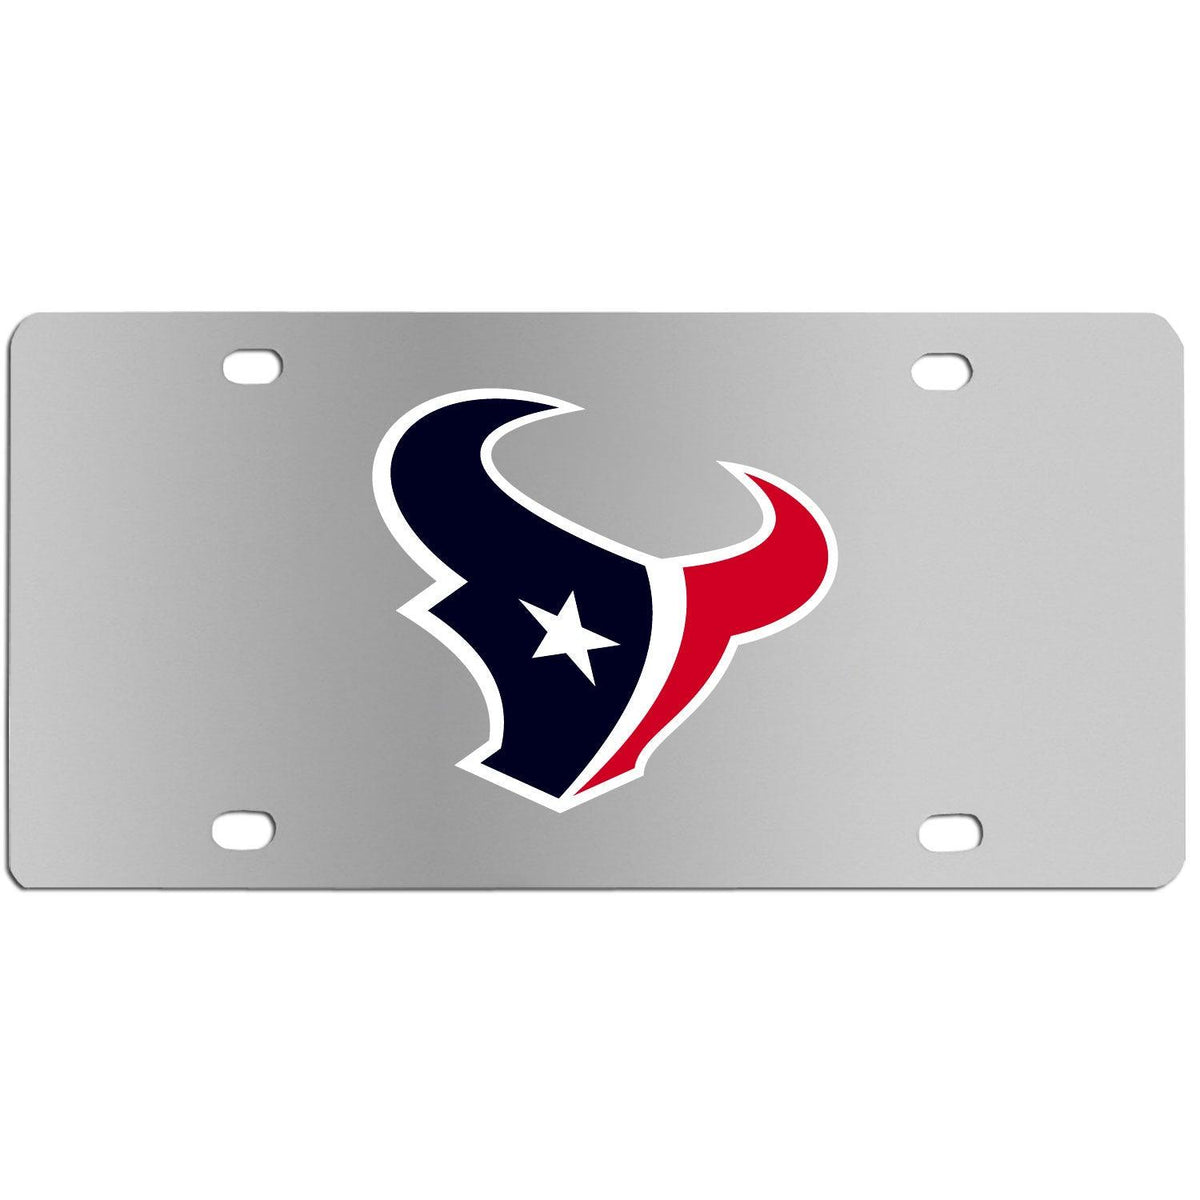 Houston Texans Steel License Plate Wall Plaque - Flyclothing LLC